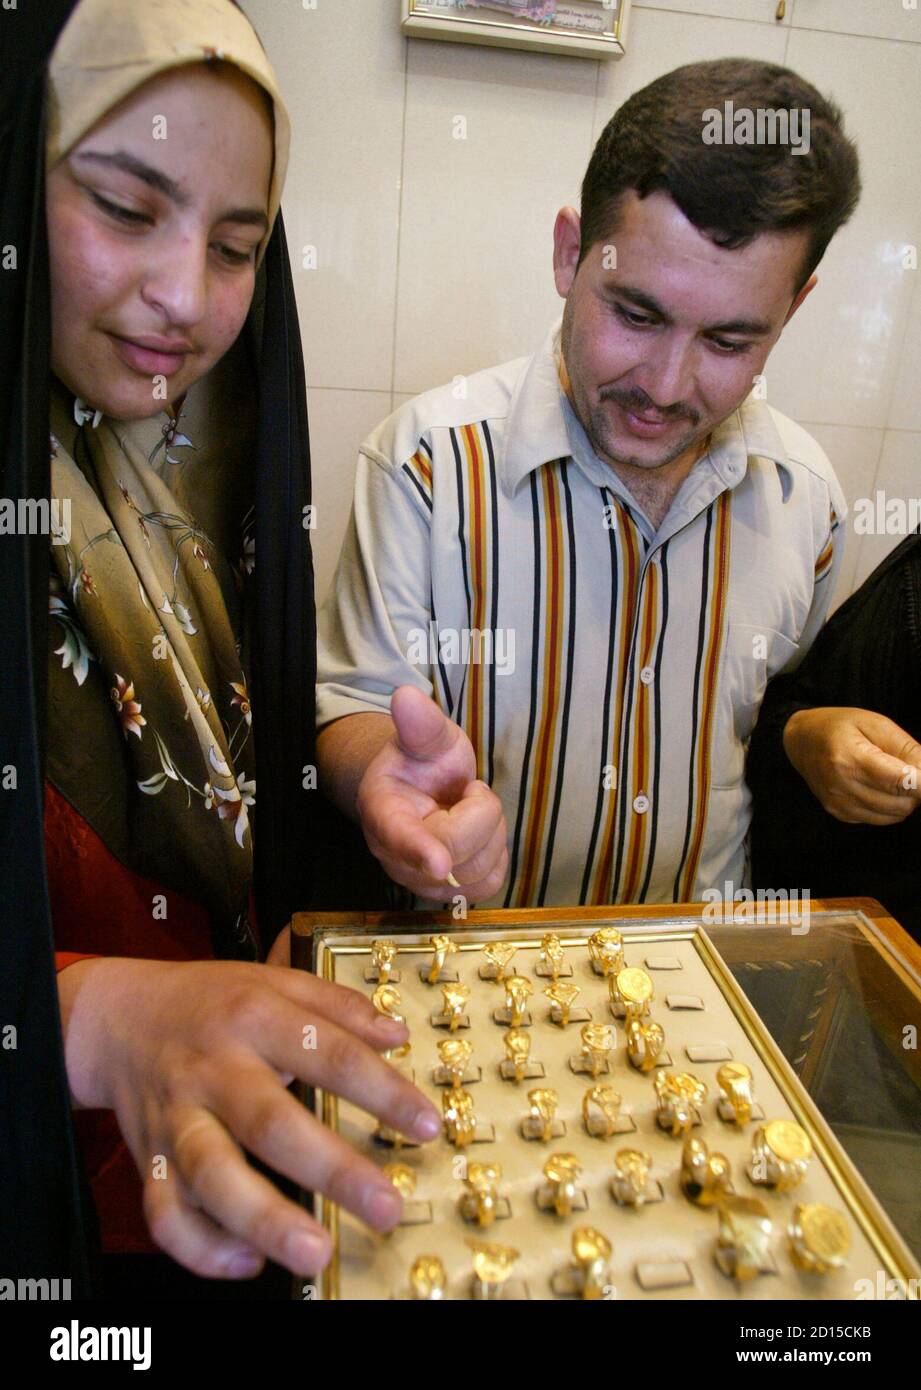 Ayser Ameir Ali (R) and his fiancee Zainab Qasim Hasan look at display of rings as they shop for gold before their upcoming wedding in Baghdad April 11, 2006. Iraqi men traditionally give presents of gold to their brides-to-be ahead of the nuptials. Gold raced above the fabled $600-an-ounce level on Tuesday, its highest since December 1980, as investors and funds poured money into precious metals to diversify their portfolios brought on by worries about inflation, Middle East tensions and uncertainties over the dollar's outlook.    REUTERS/Faleh Kheiber Stock Photo